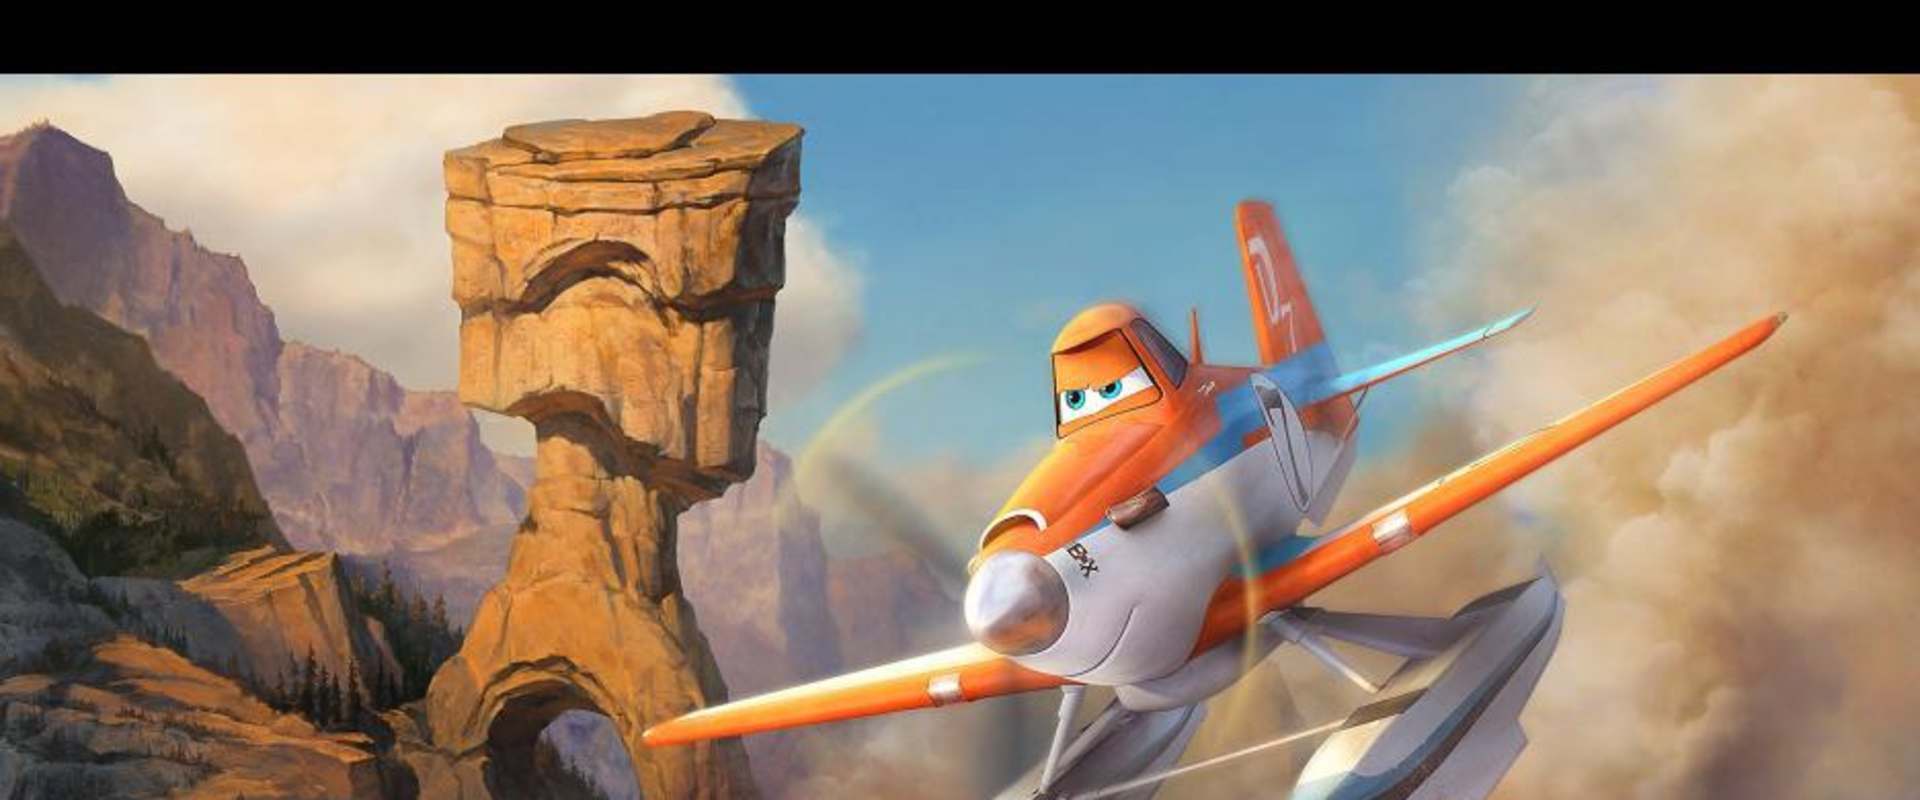 Planes: Fire & Rescue background 2